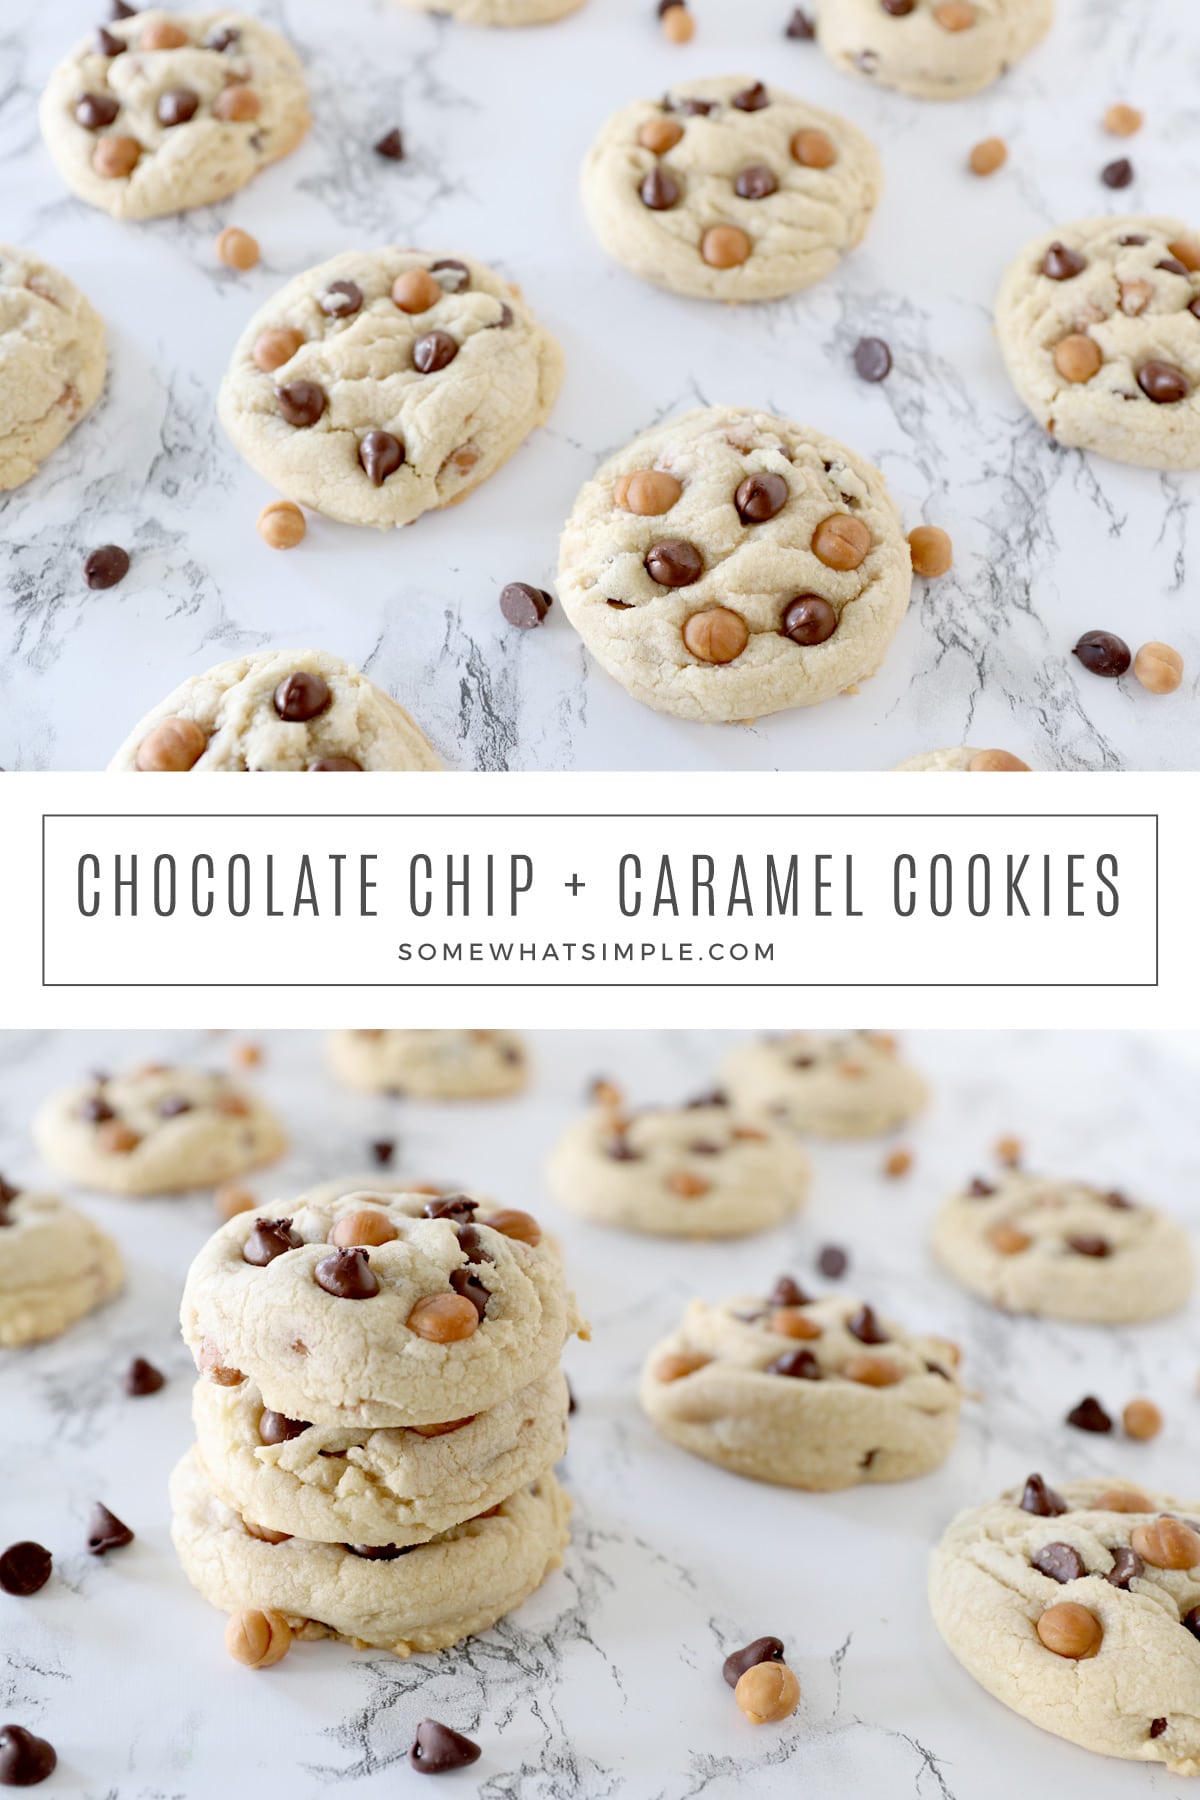 Delicious Caramel Chocolate Chip Cookies are the perfect balance of salty and sweet! This cookie recipe is thick, chewy, and totally simple to make! via @somewhatsimple